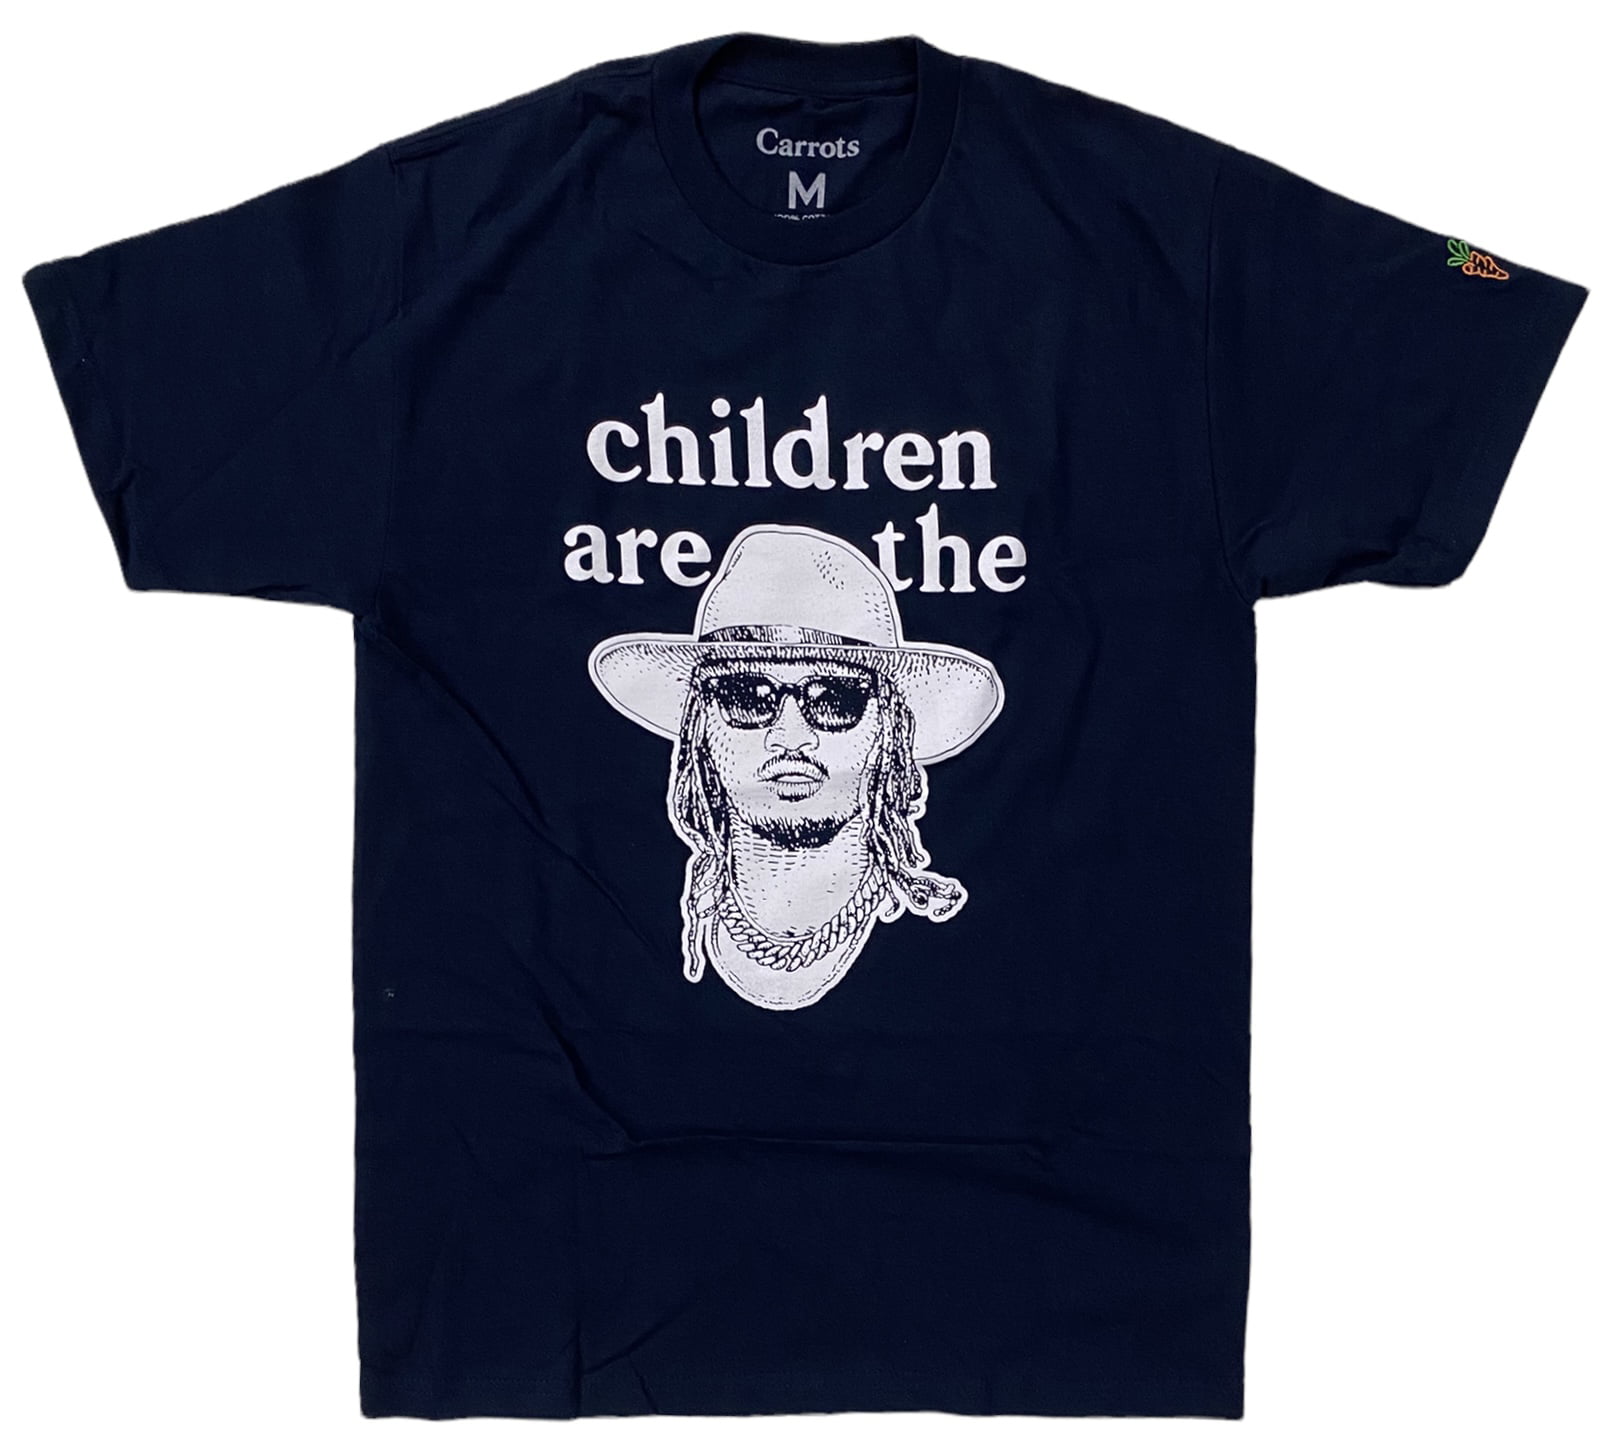 Carrots By Anwar Carrots Men's X Children Are The Future Tee T-Shirt  (Small, Navy)